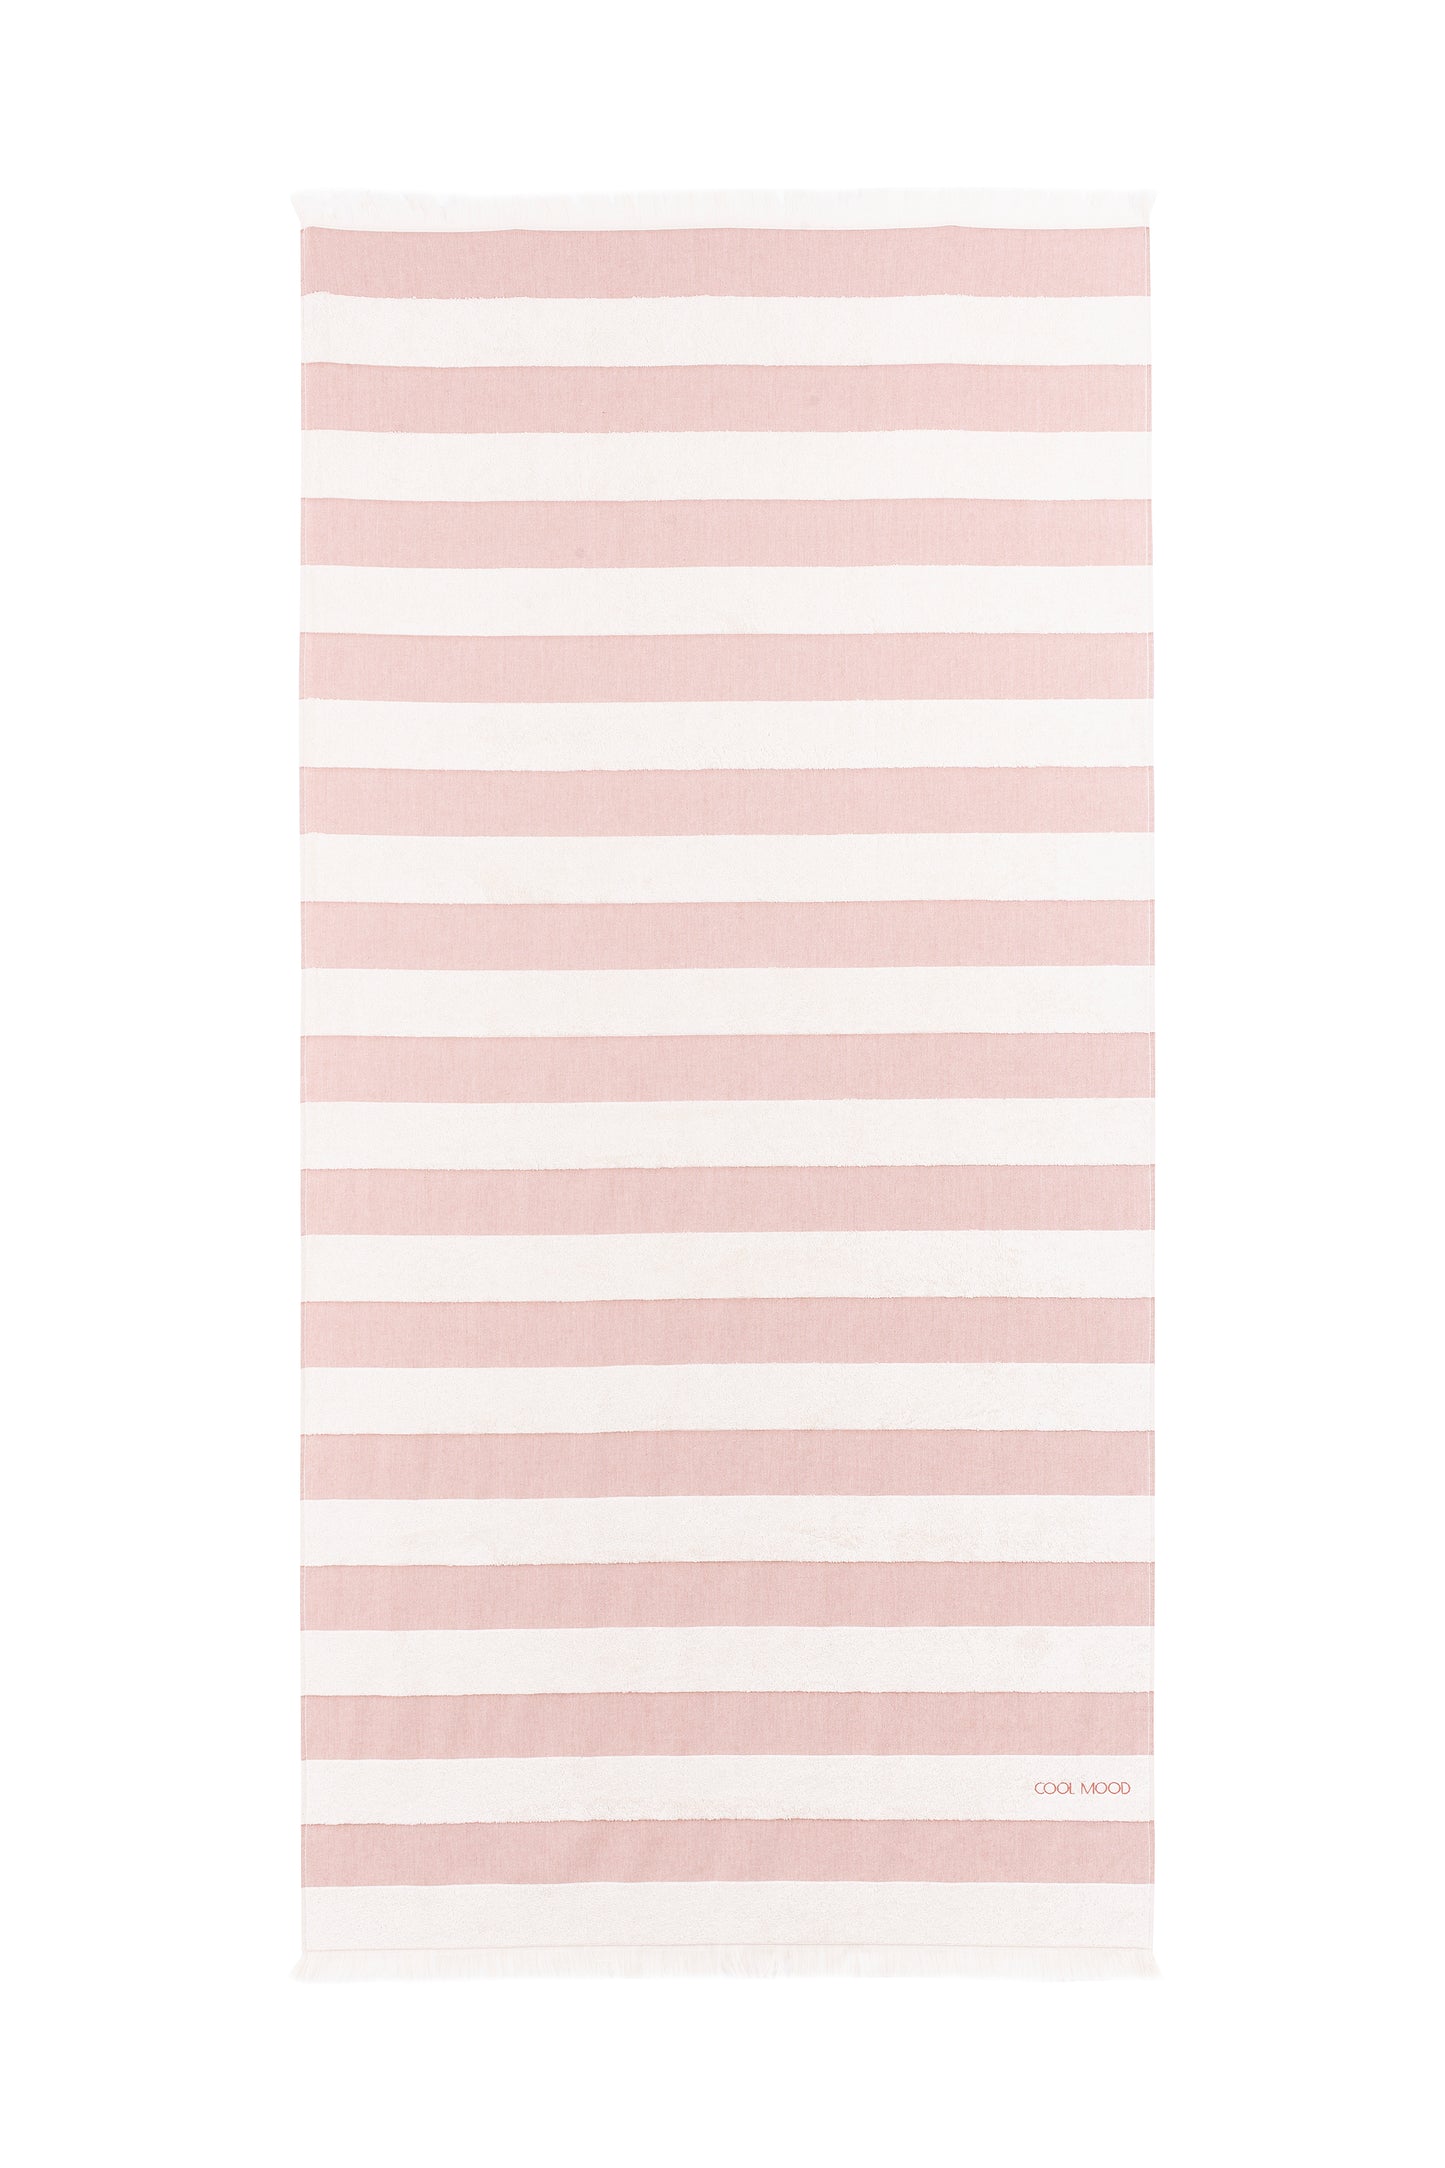 Beach towel in rust shade, with soft terry stripes